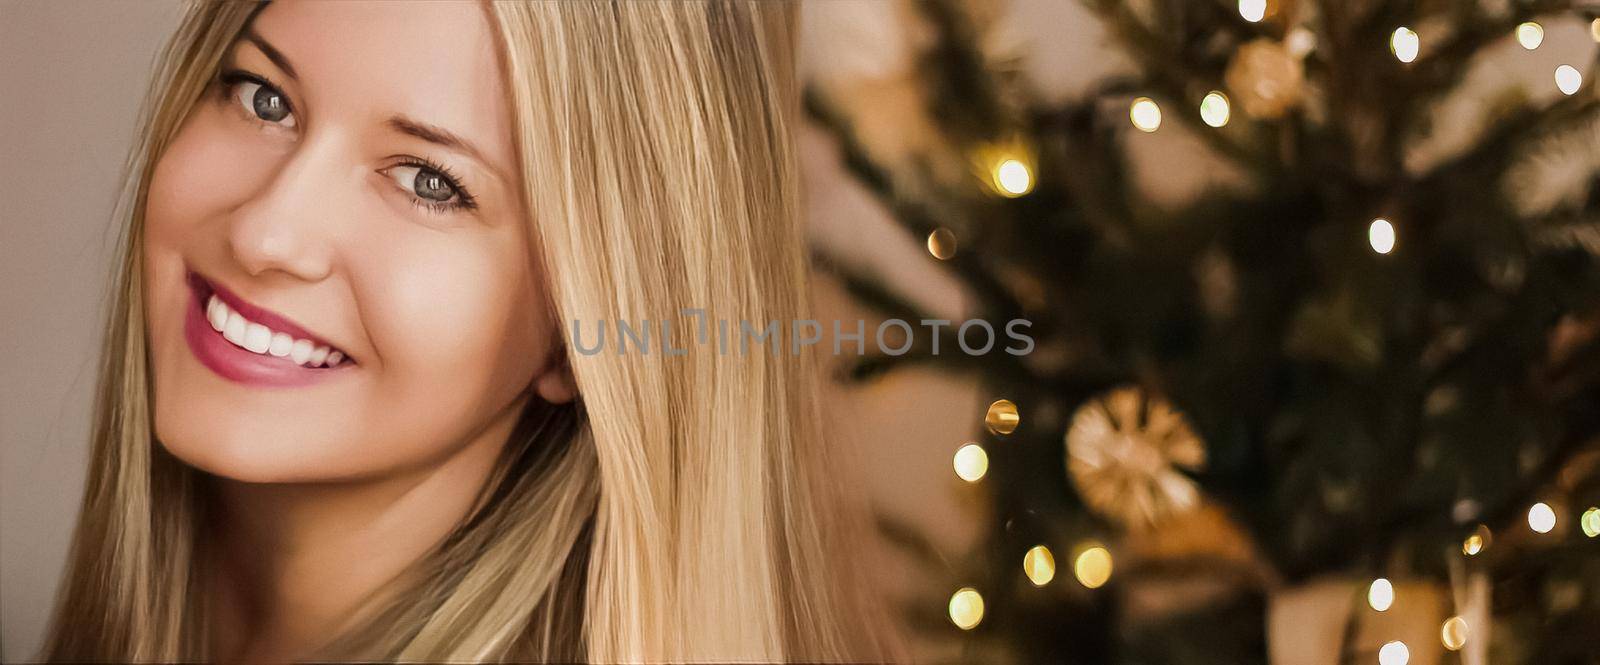 Christmas time and holiday mood concept. Happy smiling woman and decorated xmas tree lights on background.